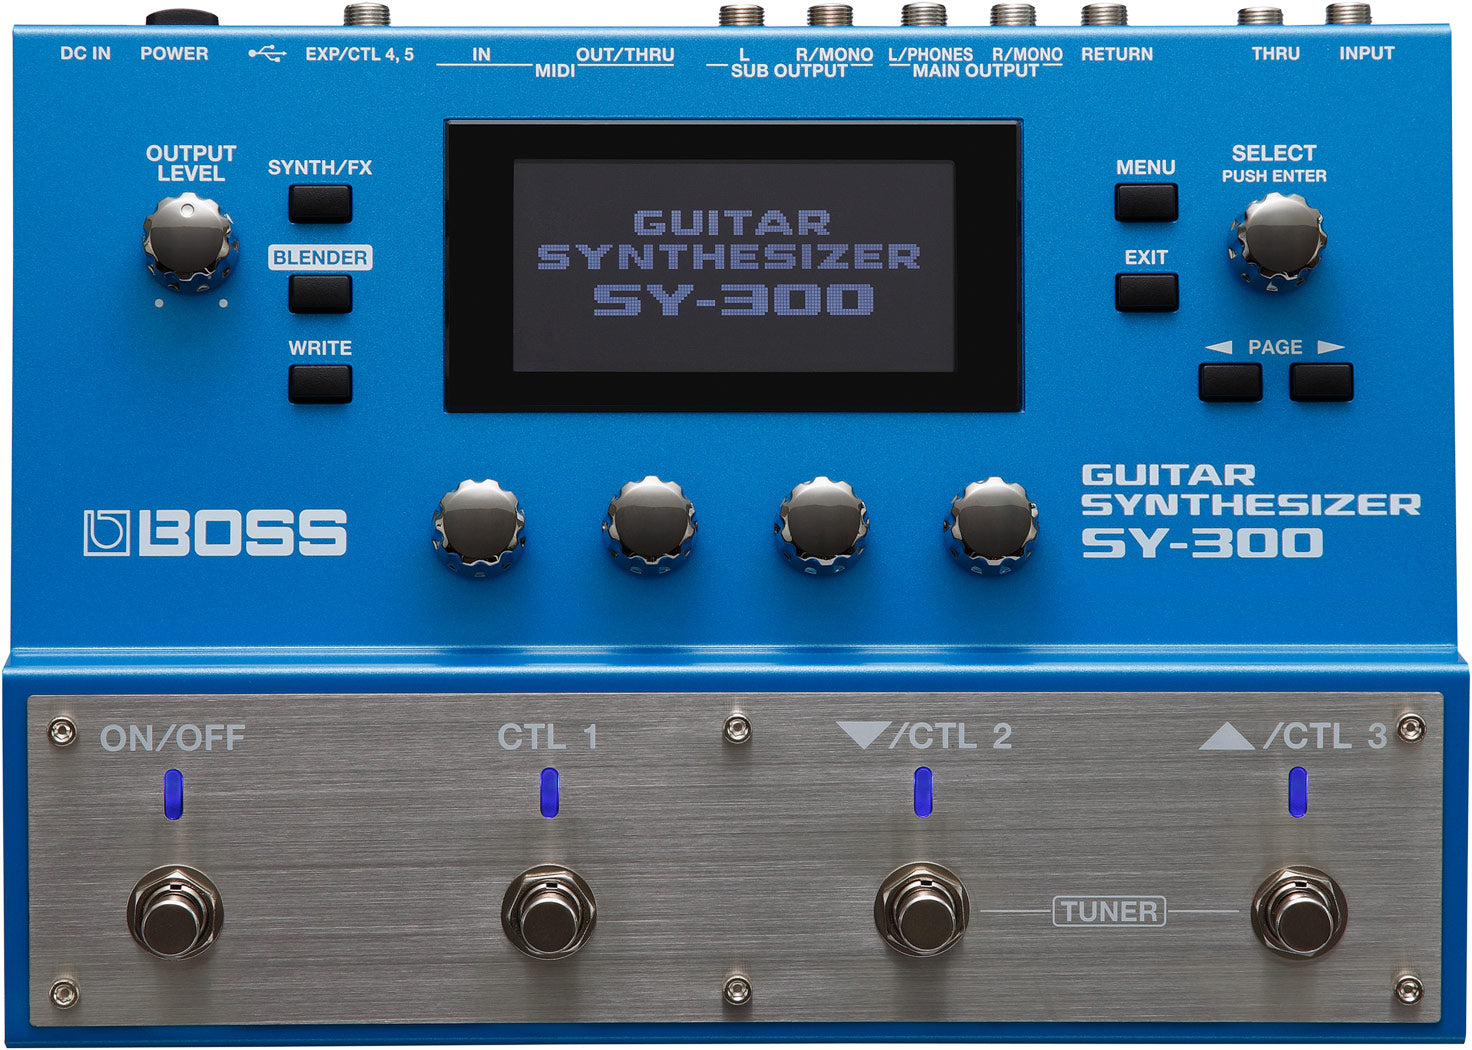 BOSS SY-300 Guitar Synthesizer Pedal